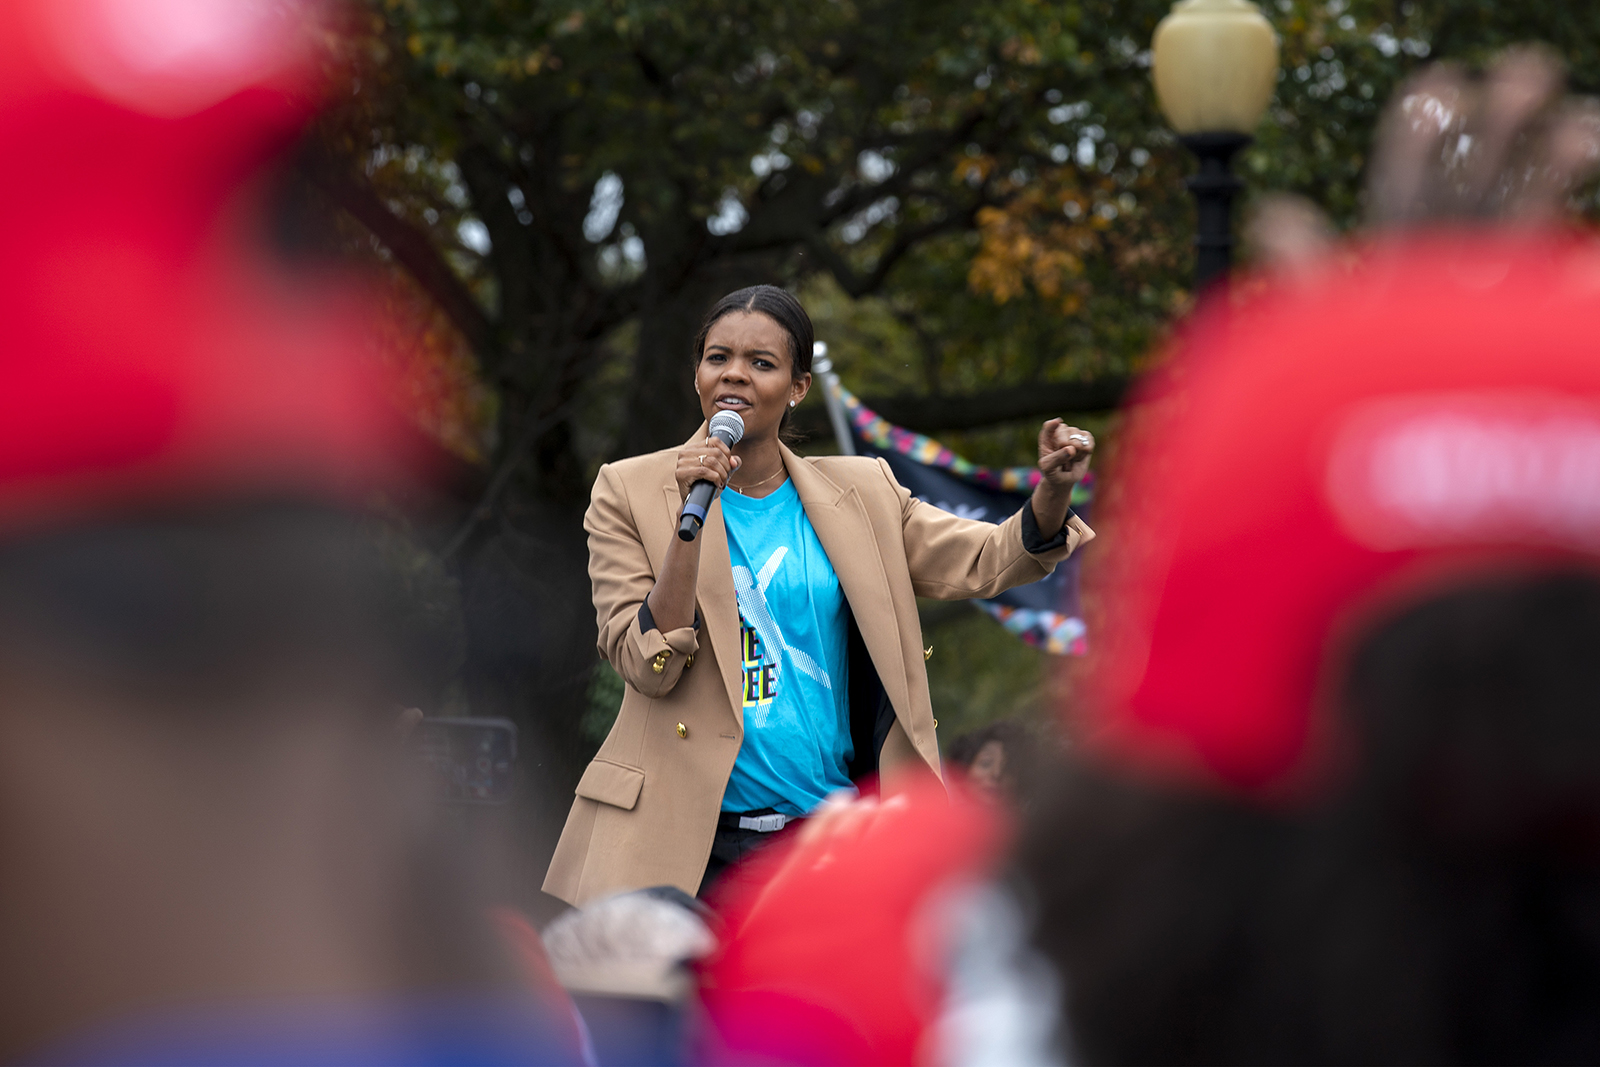 Health activist and political activist Candace Owens speaks during a press conference on the Ellipse at the White House on Saturday, Oct. 10, 2020, in Washington.  (AP Photo/Jose Luis Magana)